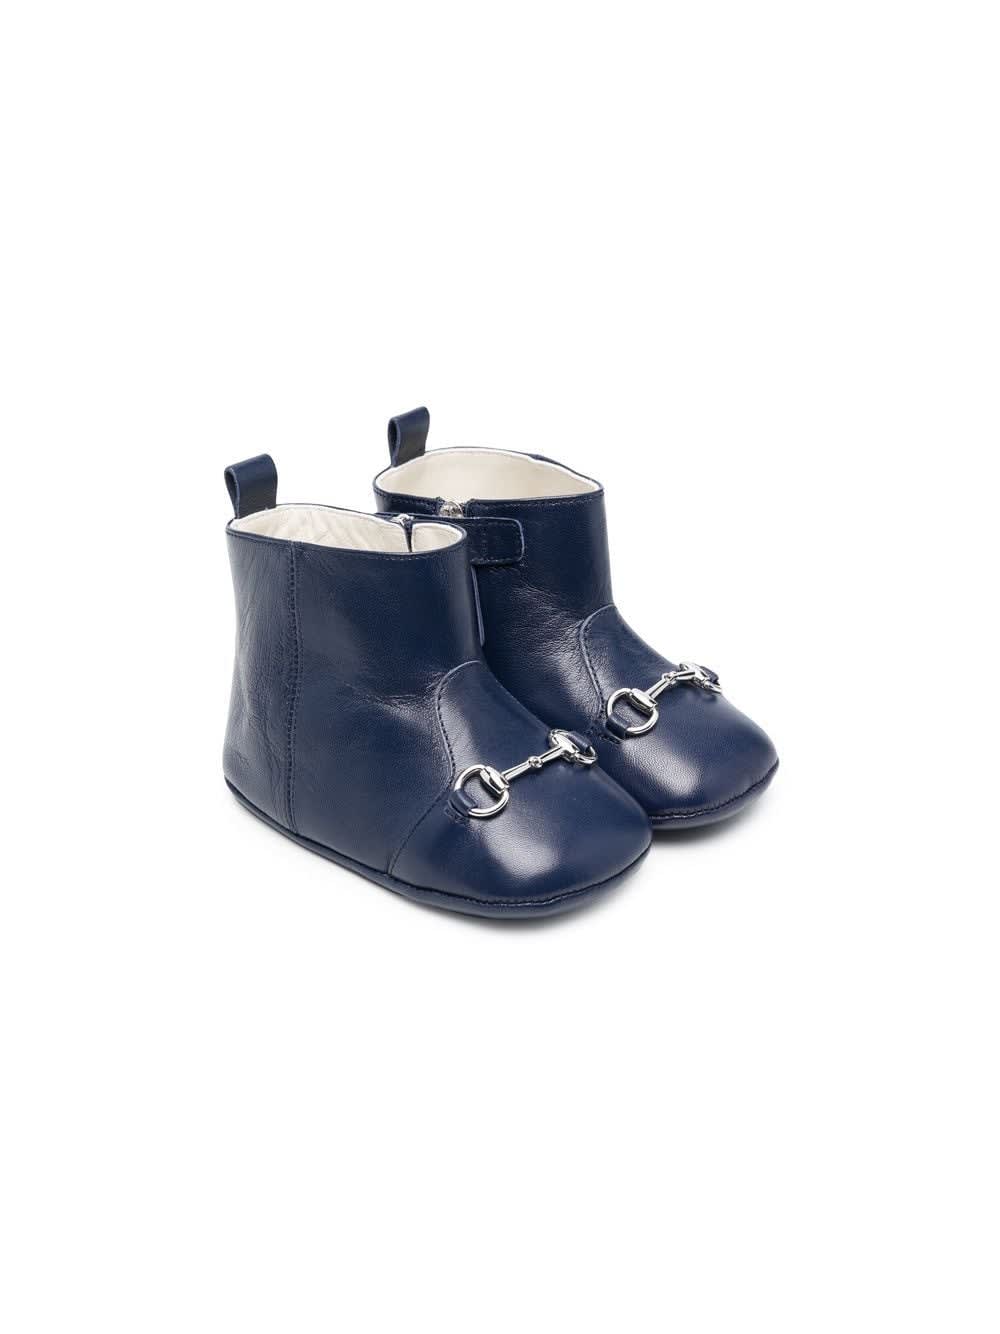 Gucci Blue Leather Ankle Boots